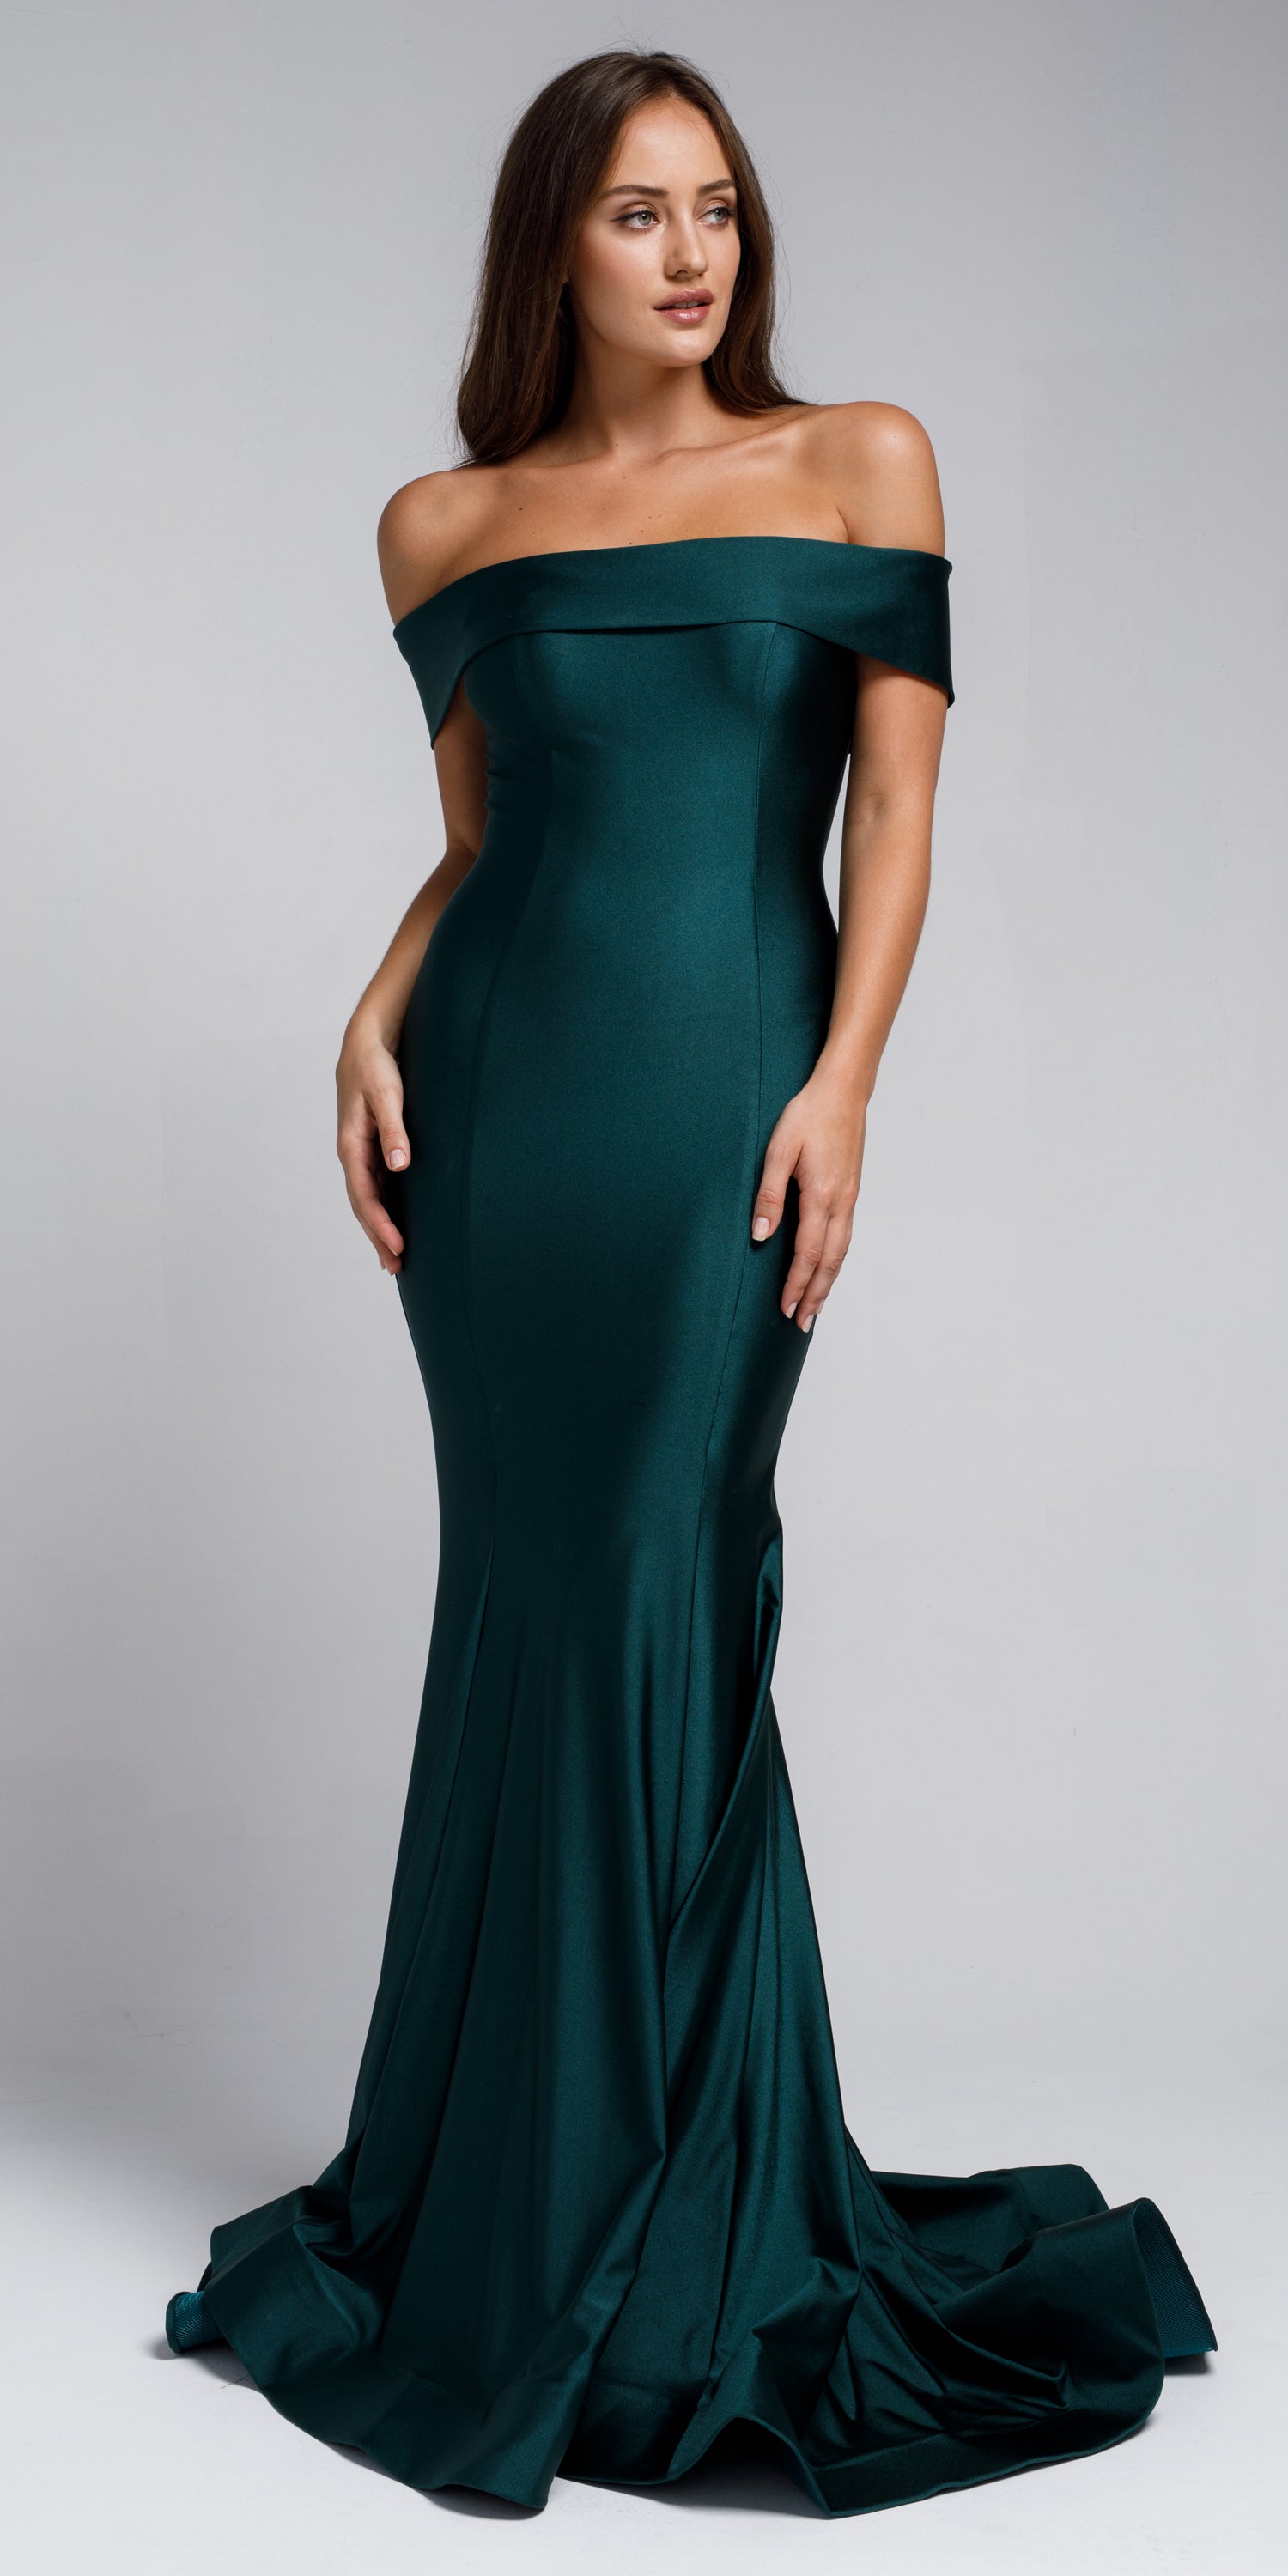 Image of Off Shoulder Fitted Prom Gown in an alternative image